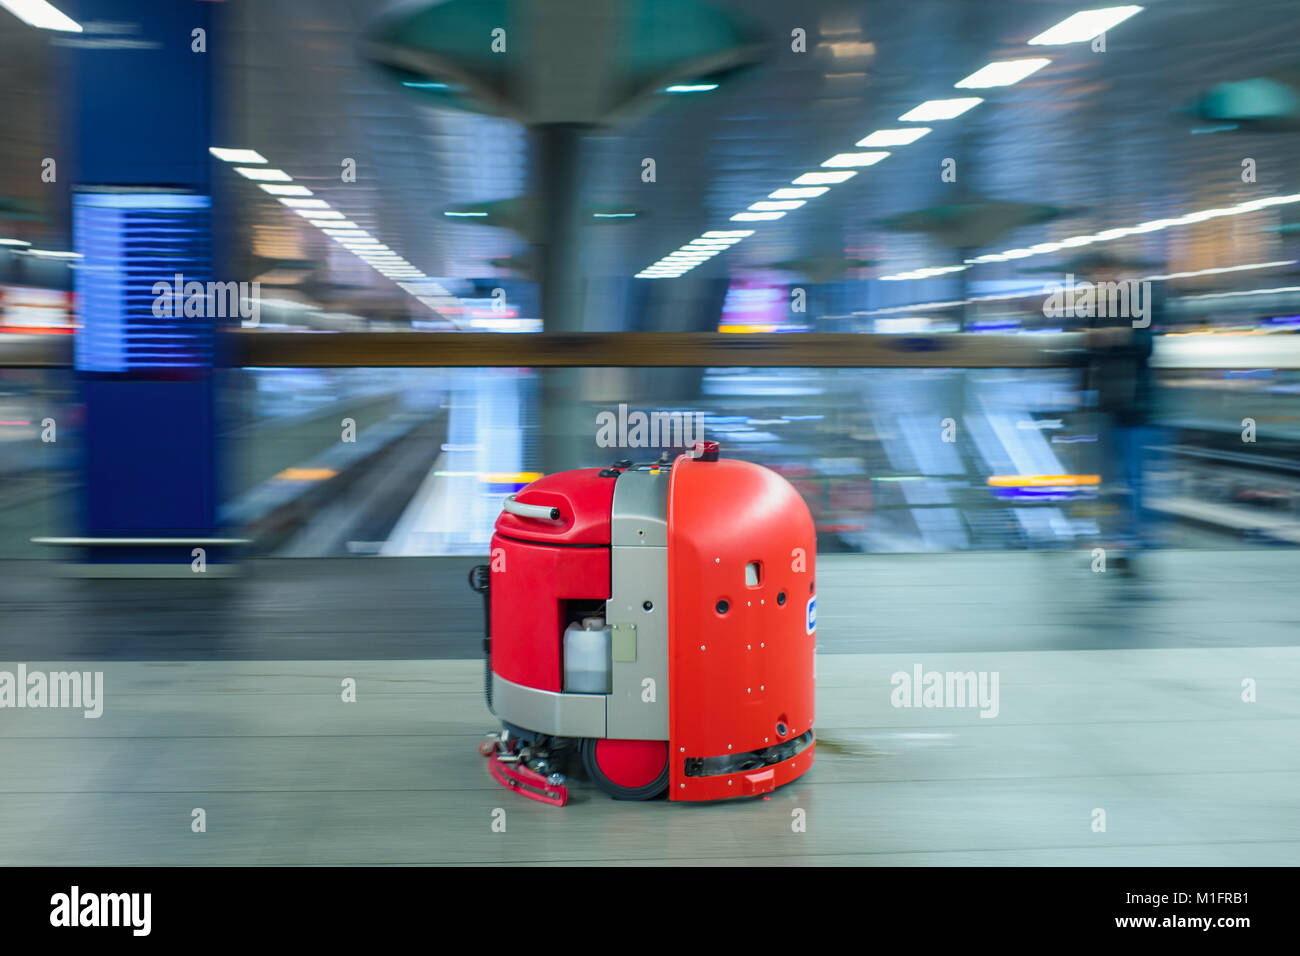 Berlin, Germany. 30th Jan, 2018. A Cleanfix RA660 navigator cleaning robot  driving through a closedoff area during a race between four manufacturers  of cleaning robots at the main station in Berlin, Germany,